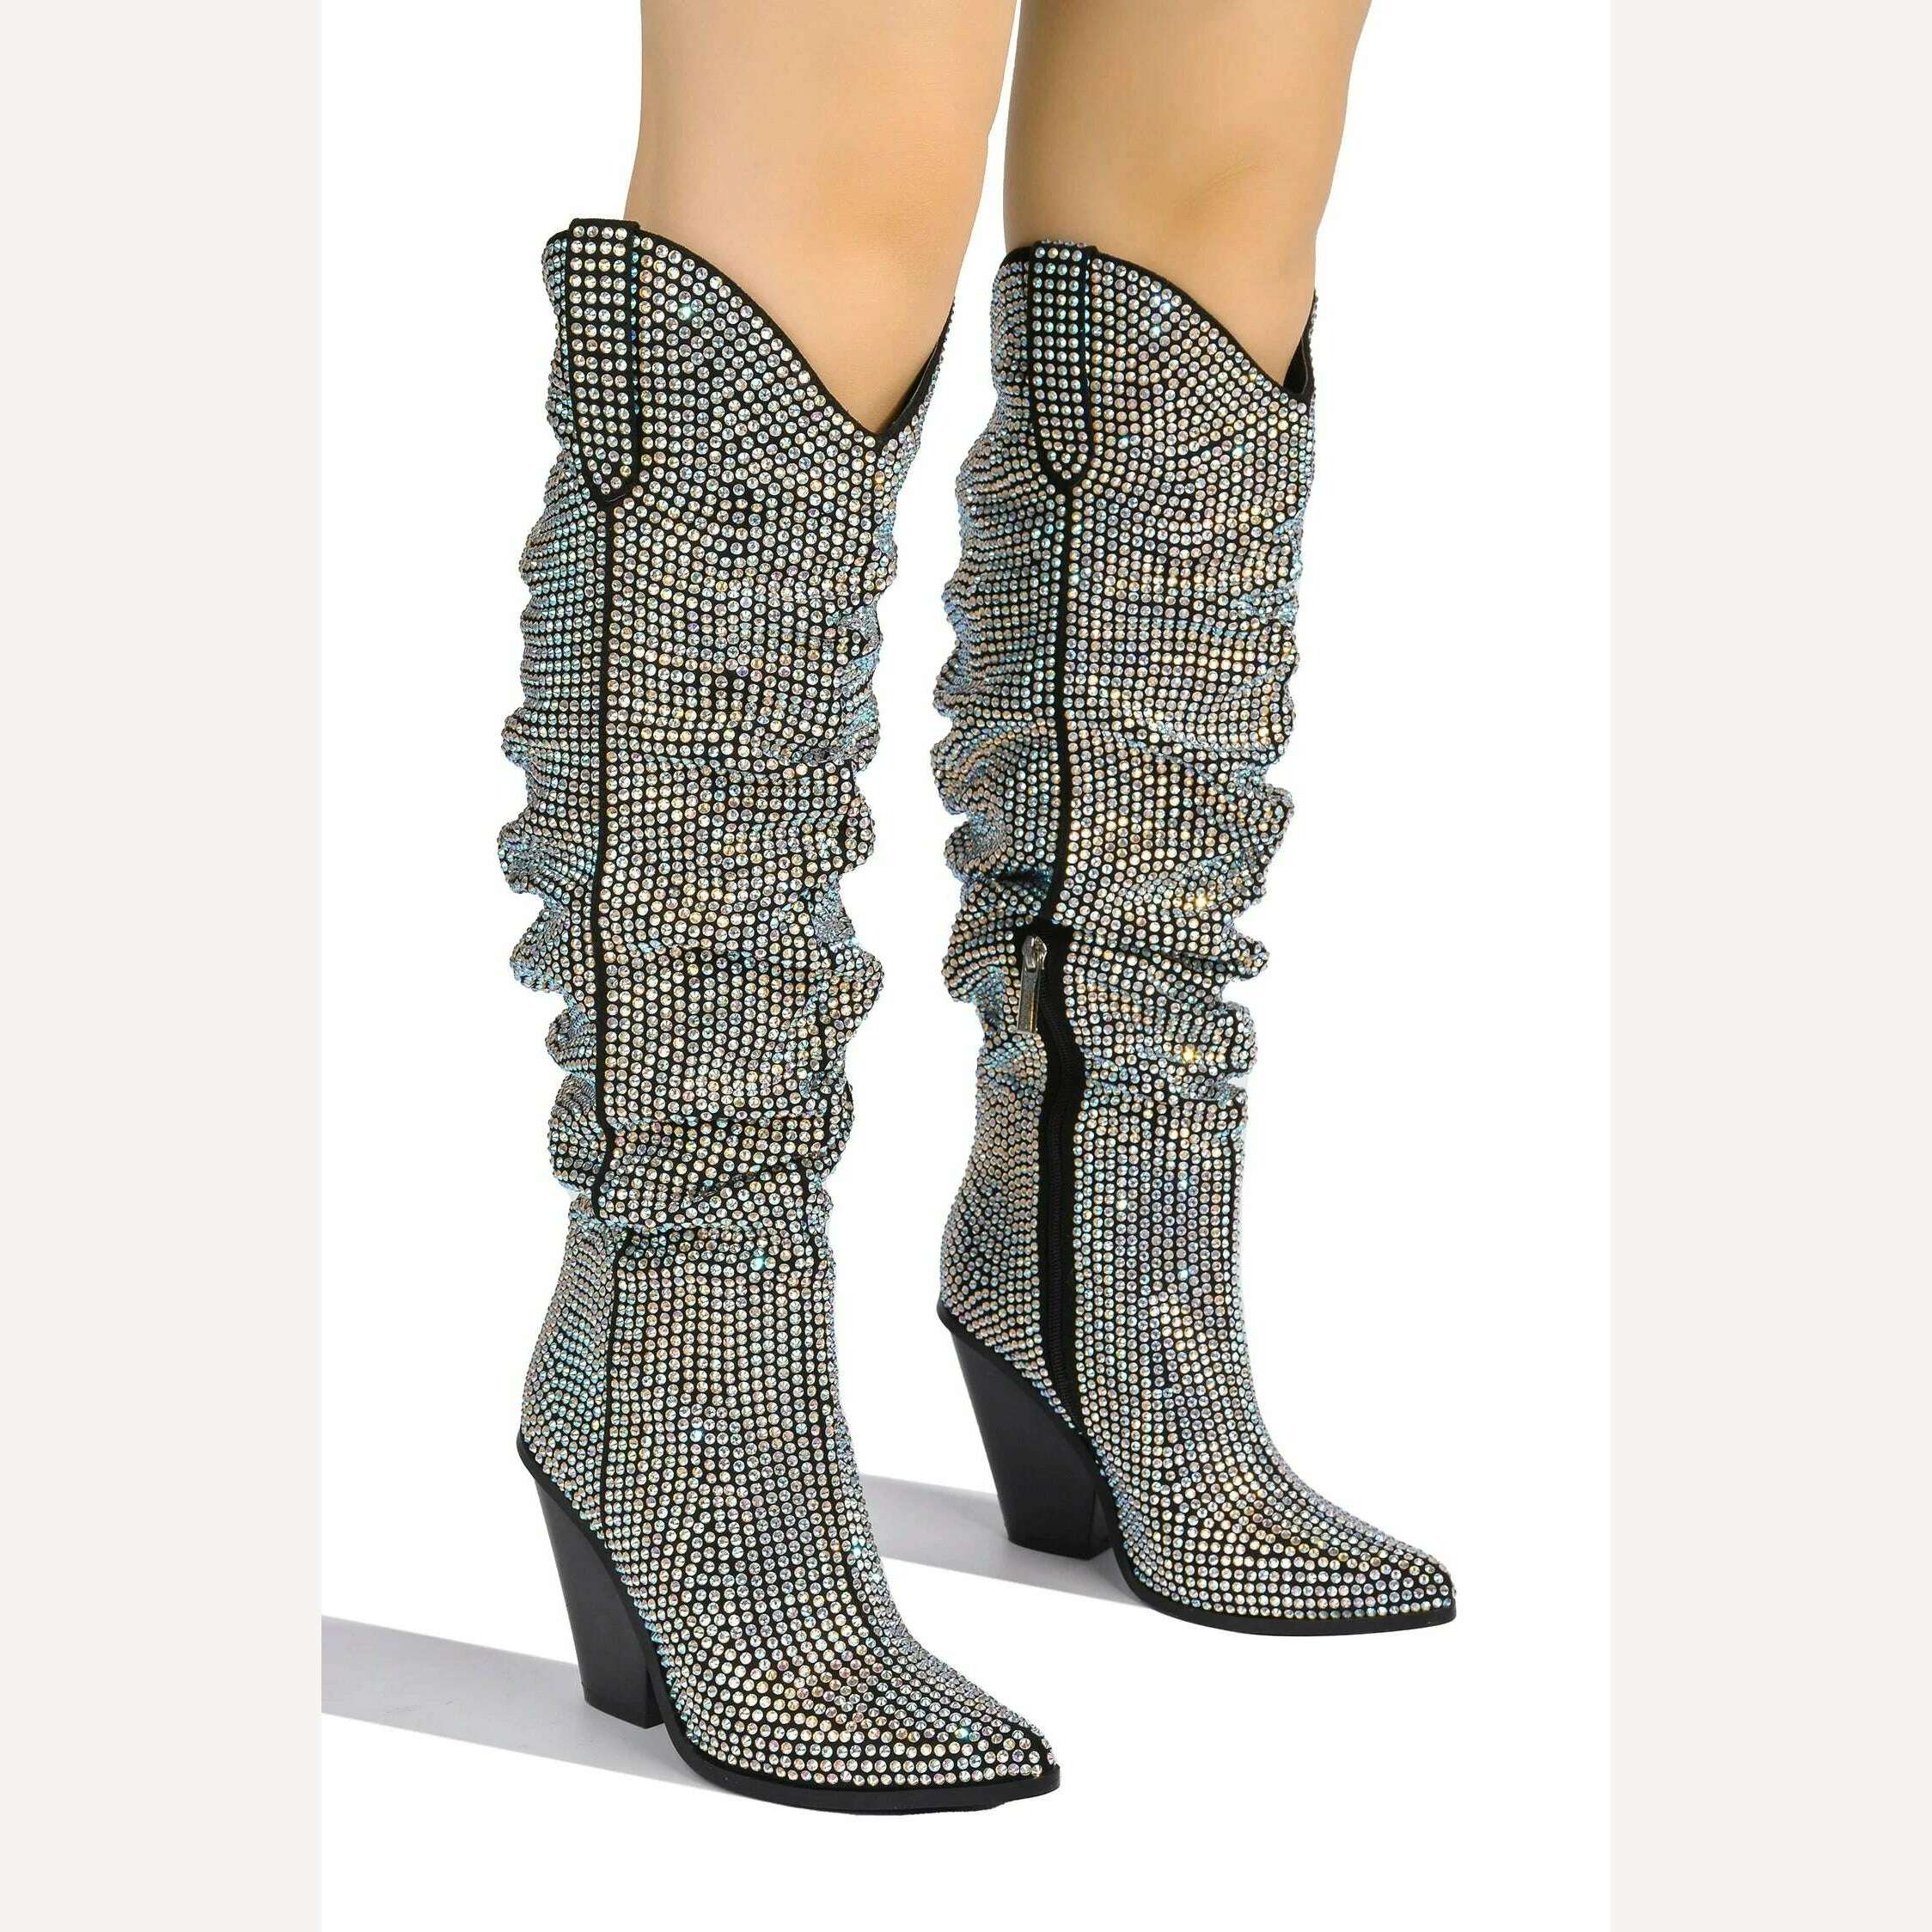 KIMLUD, Sexy Luxury Bling Silver Crystal Knee High Boots Chunky Womens Designer Stacked Cowboy Boots Rhinestone Glitter Shoes 44, KIMLUD Women's Clothes